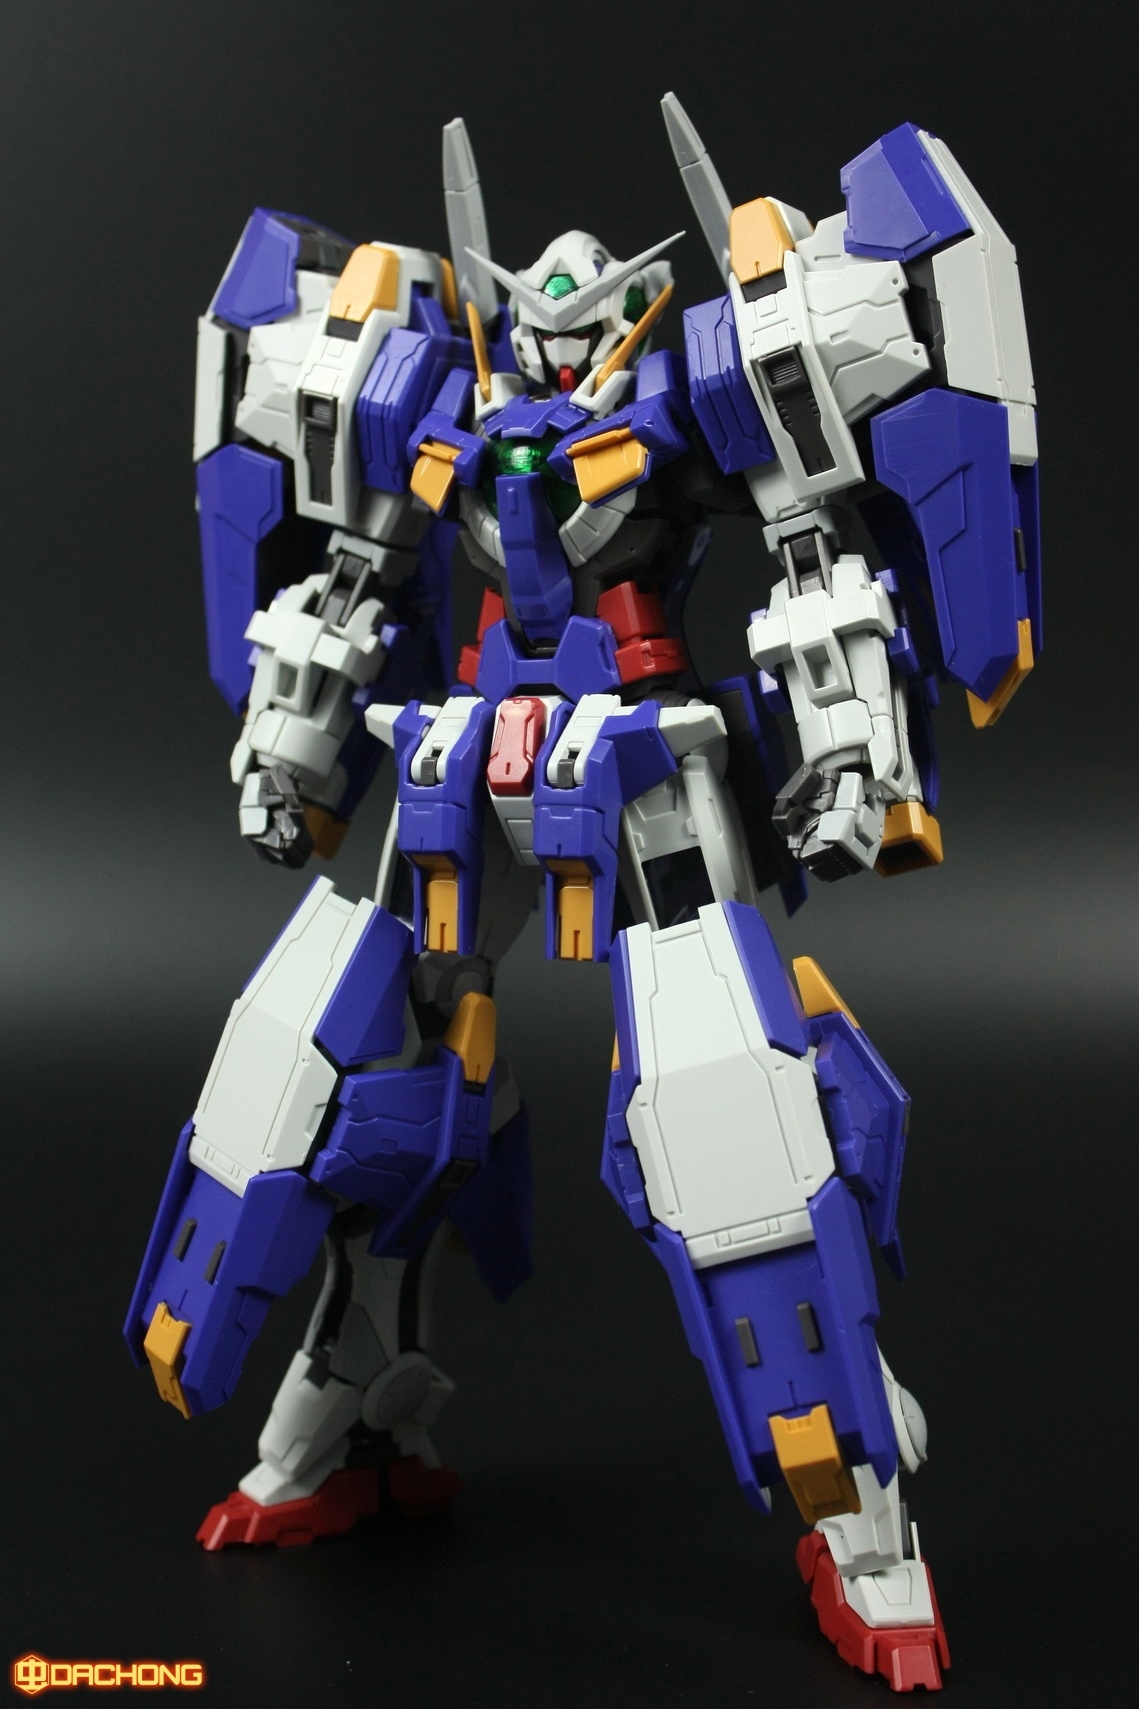 S254_MG_exia_HS_review_inask_064.jpg